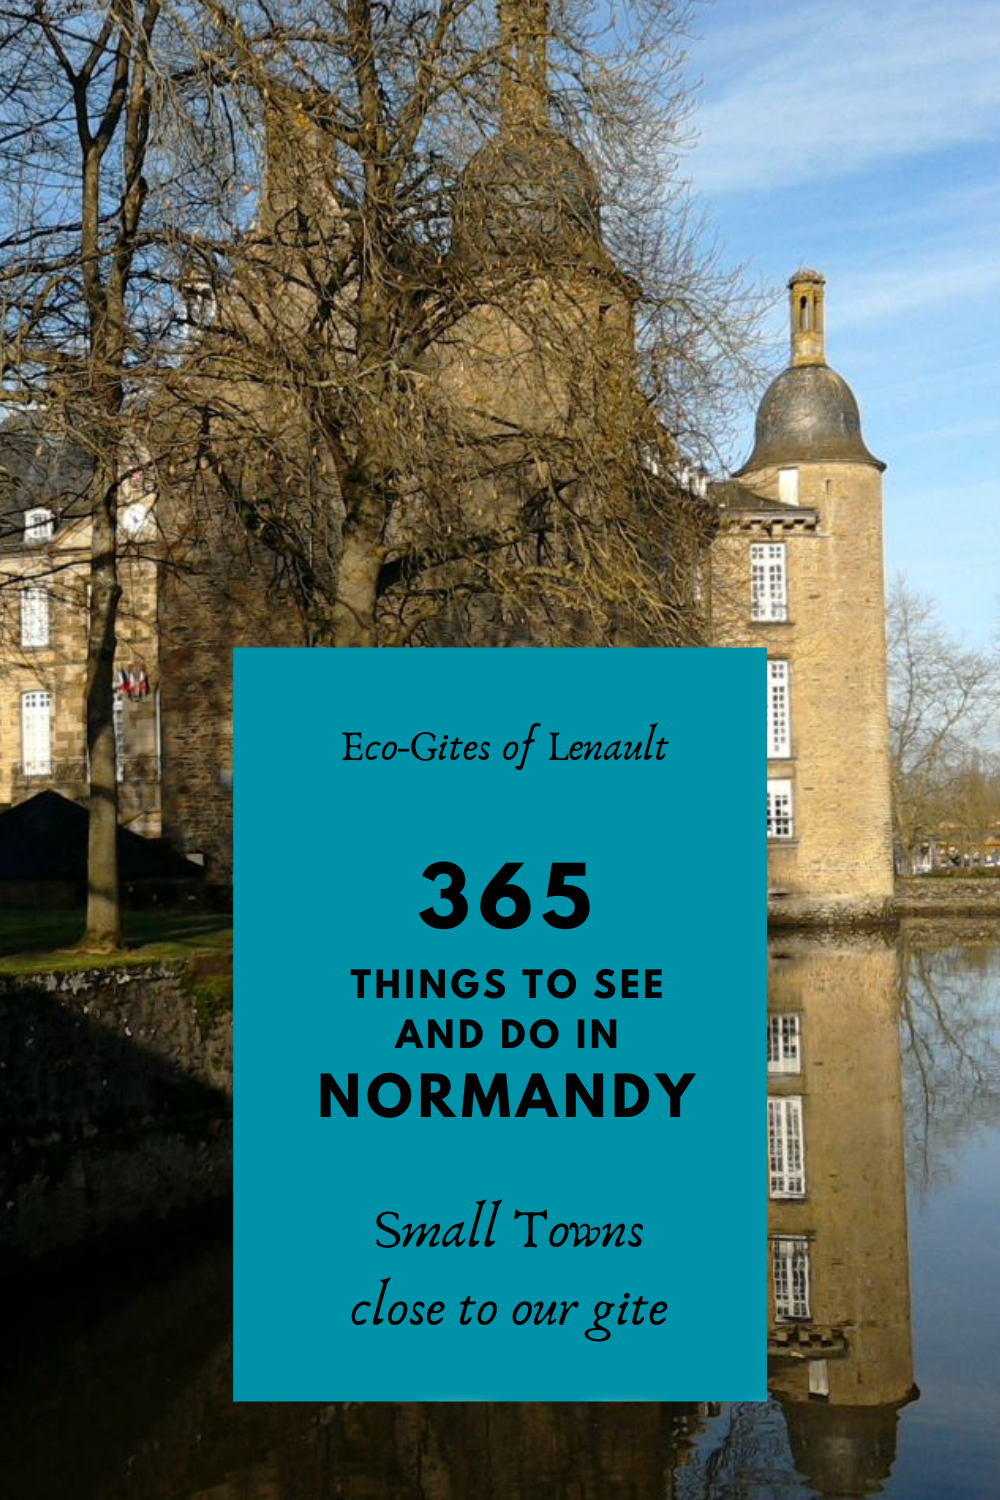 Small towns close to Eco-Gites of Lenault, Normandy, France